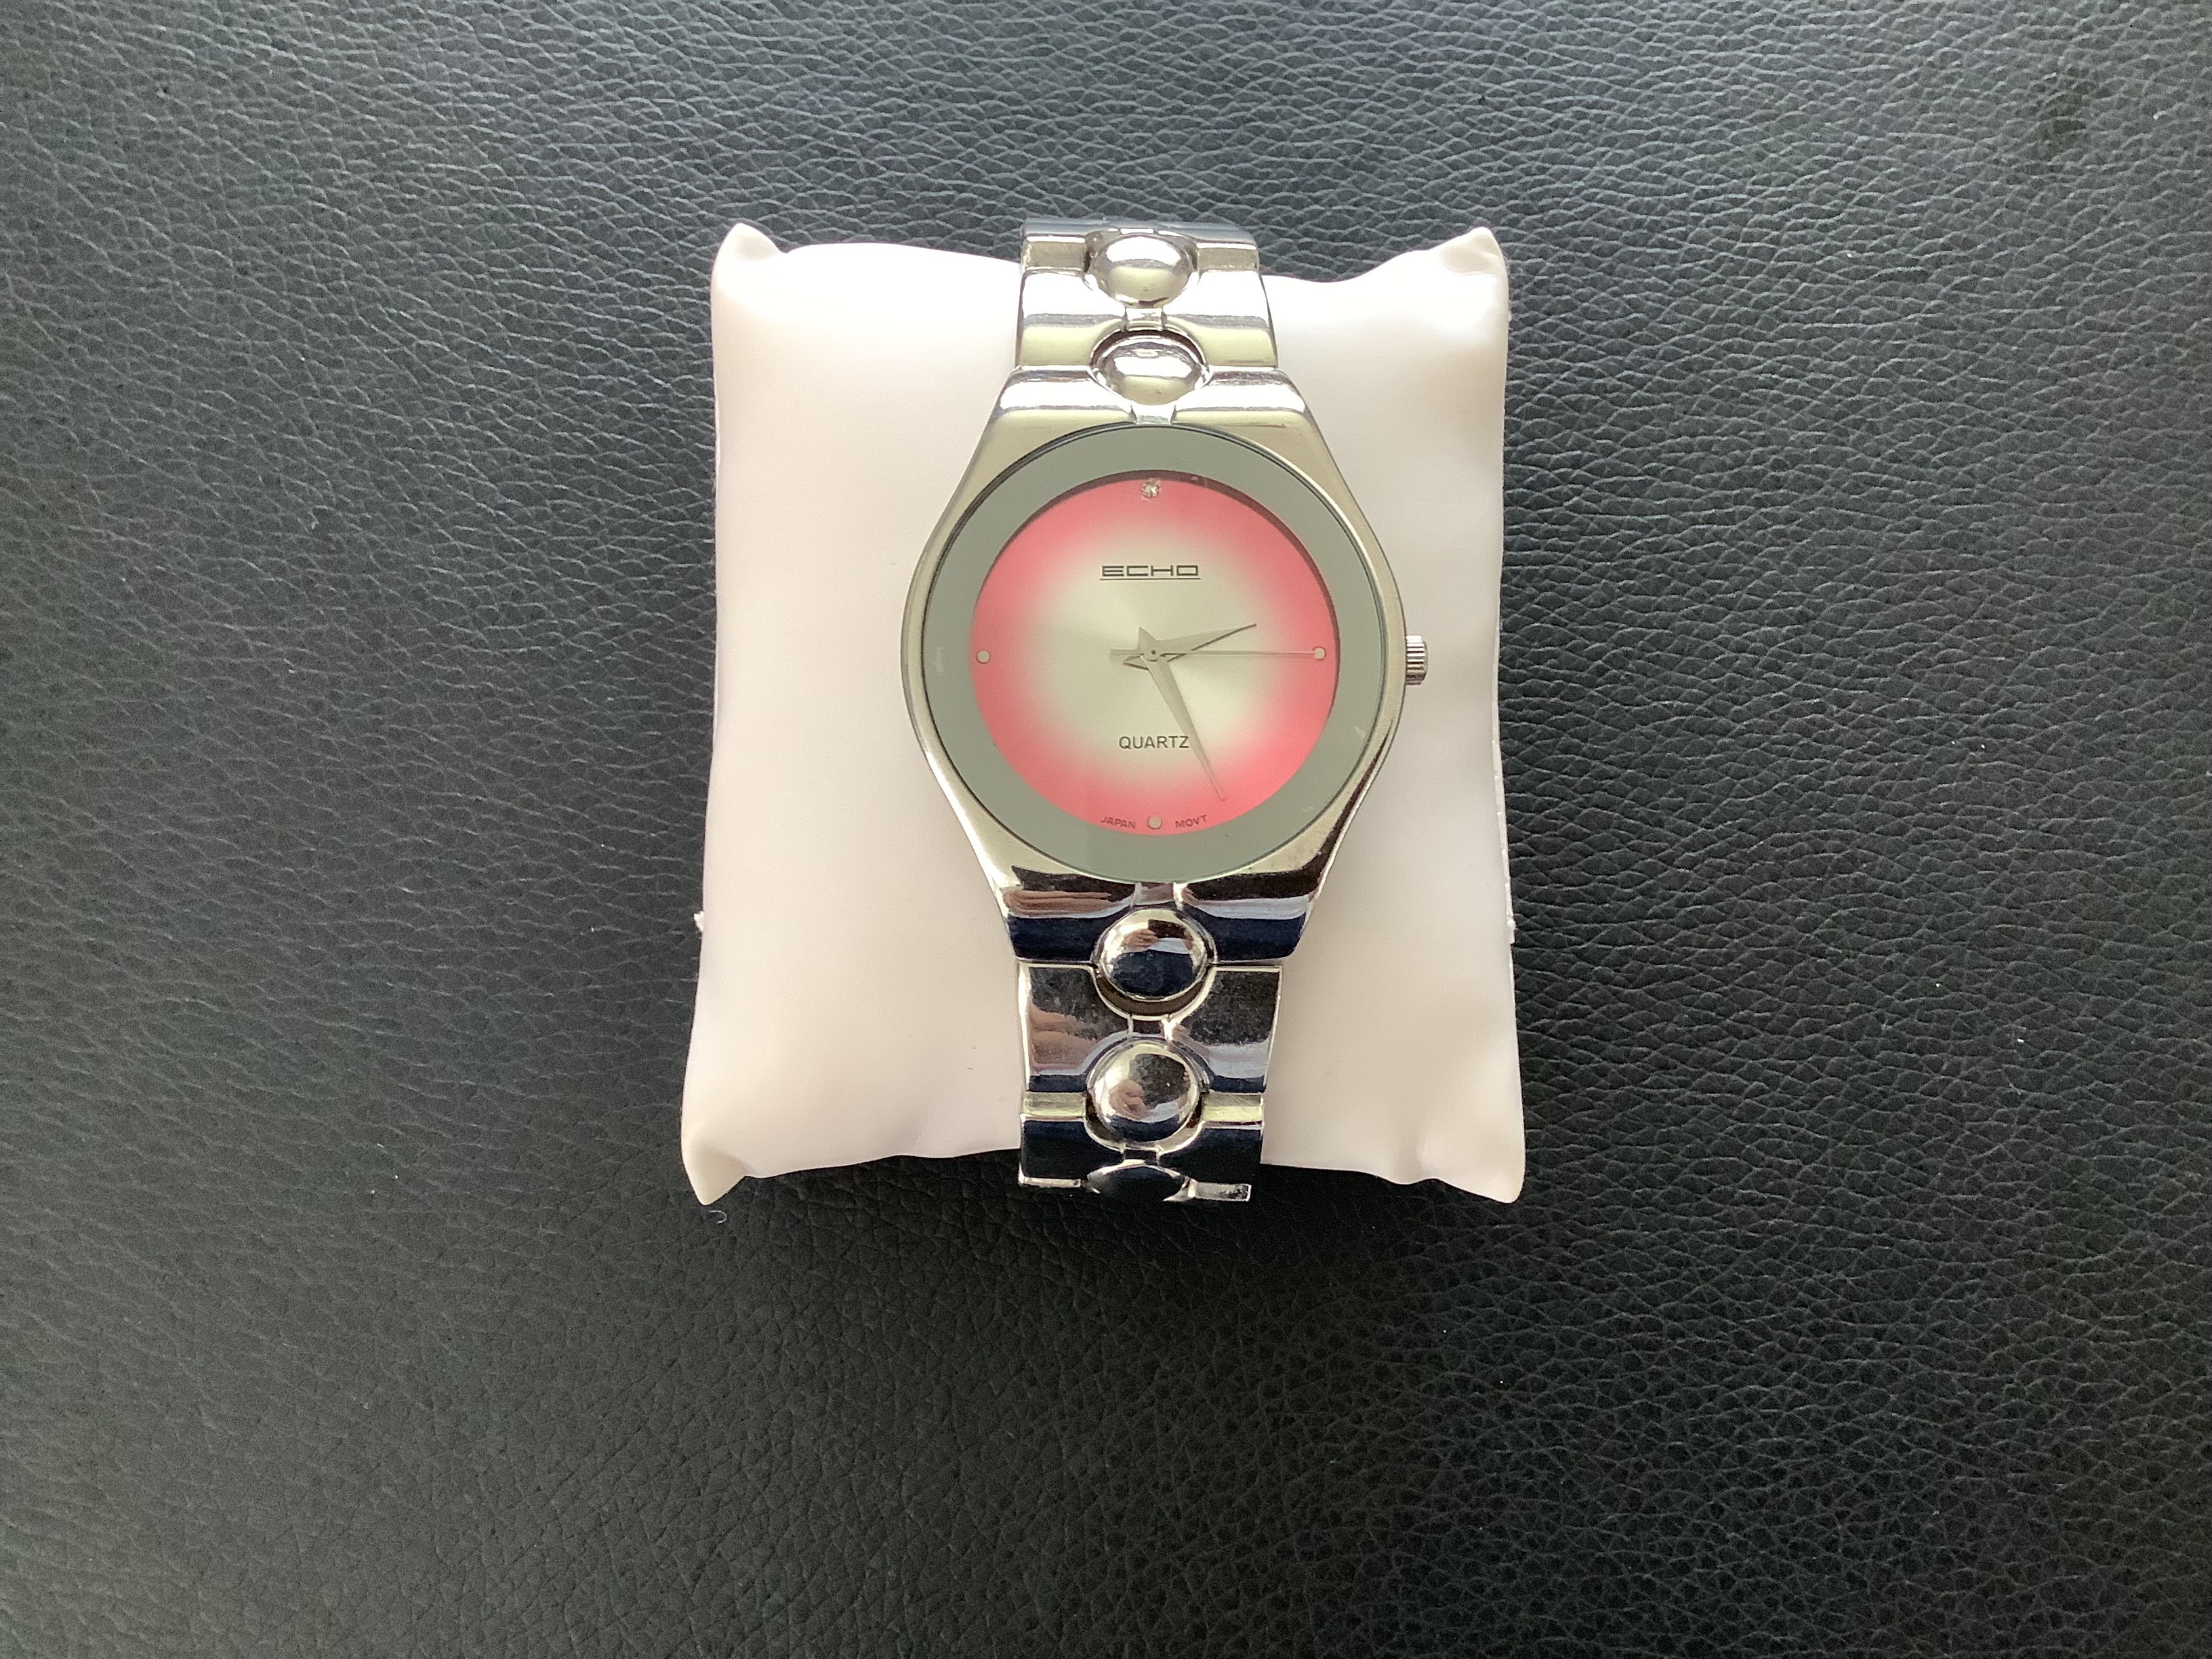 Delightful Echo Quartz as new wristwatch with mirror effect face (GS 148) Here is an Echo